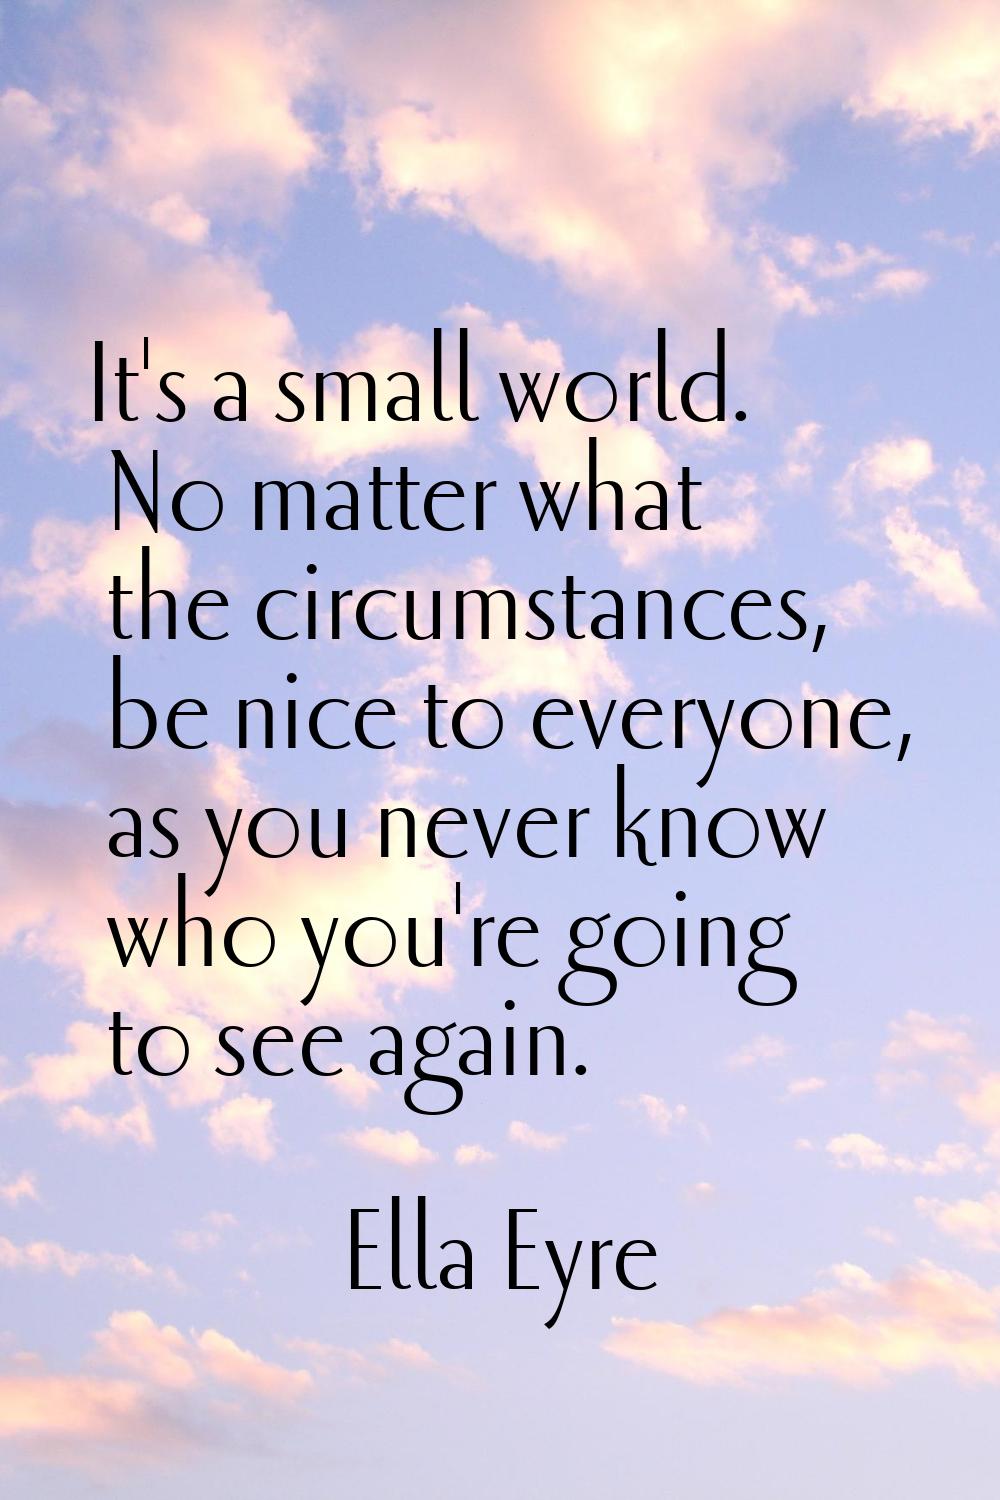 It's a small world. No matter what the circumstances, be nice to everyone, as you never know who yo